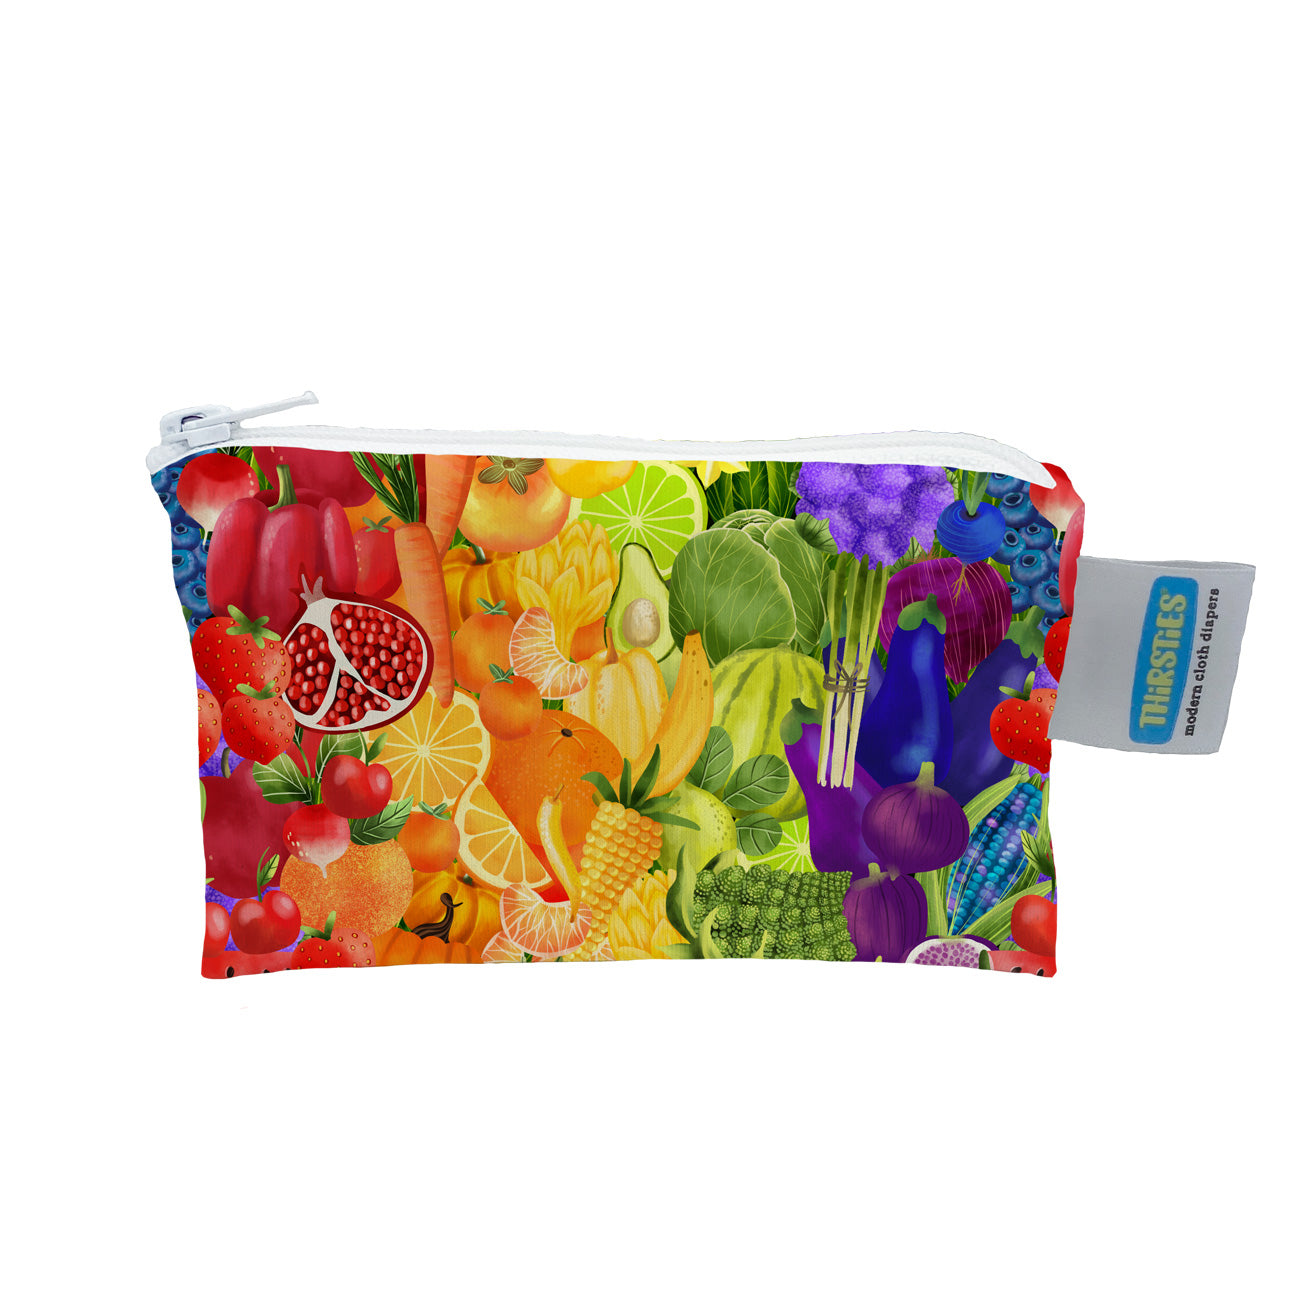 Image of Thirsties Simple Pouch in Rainbow Harvest